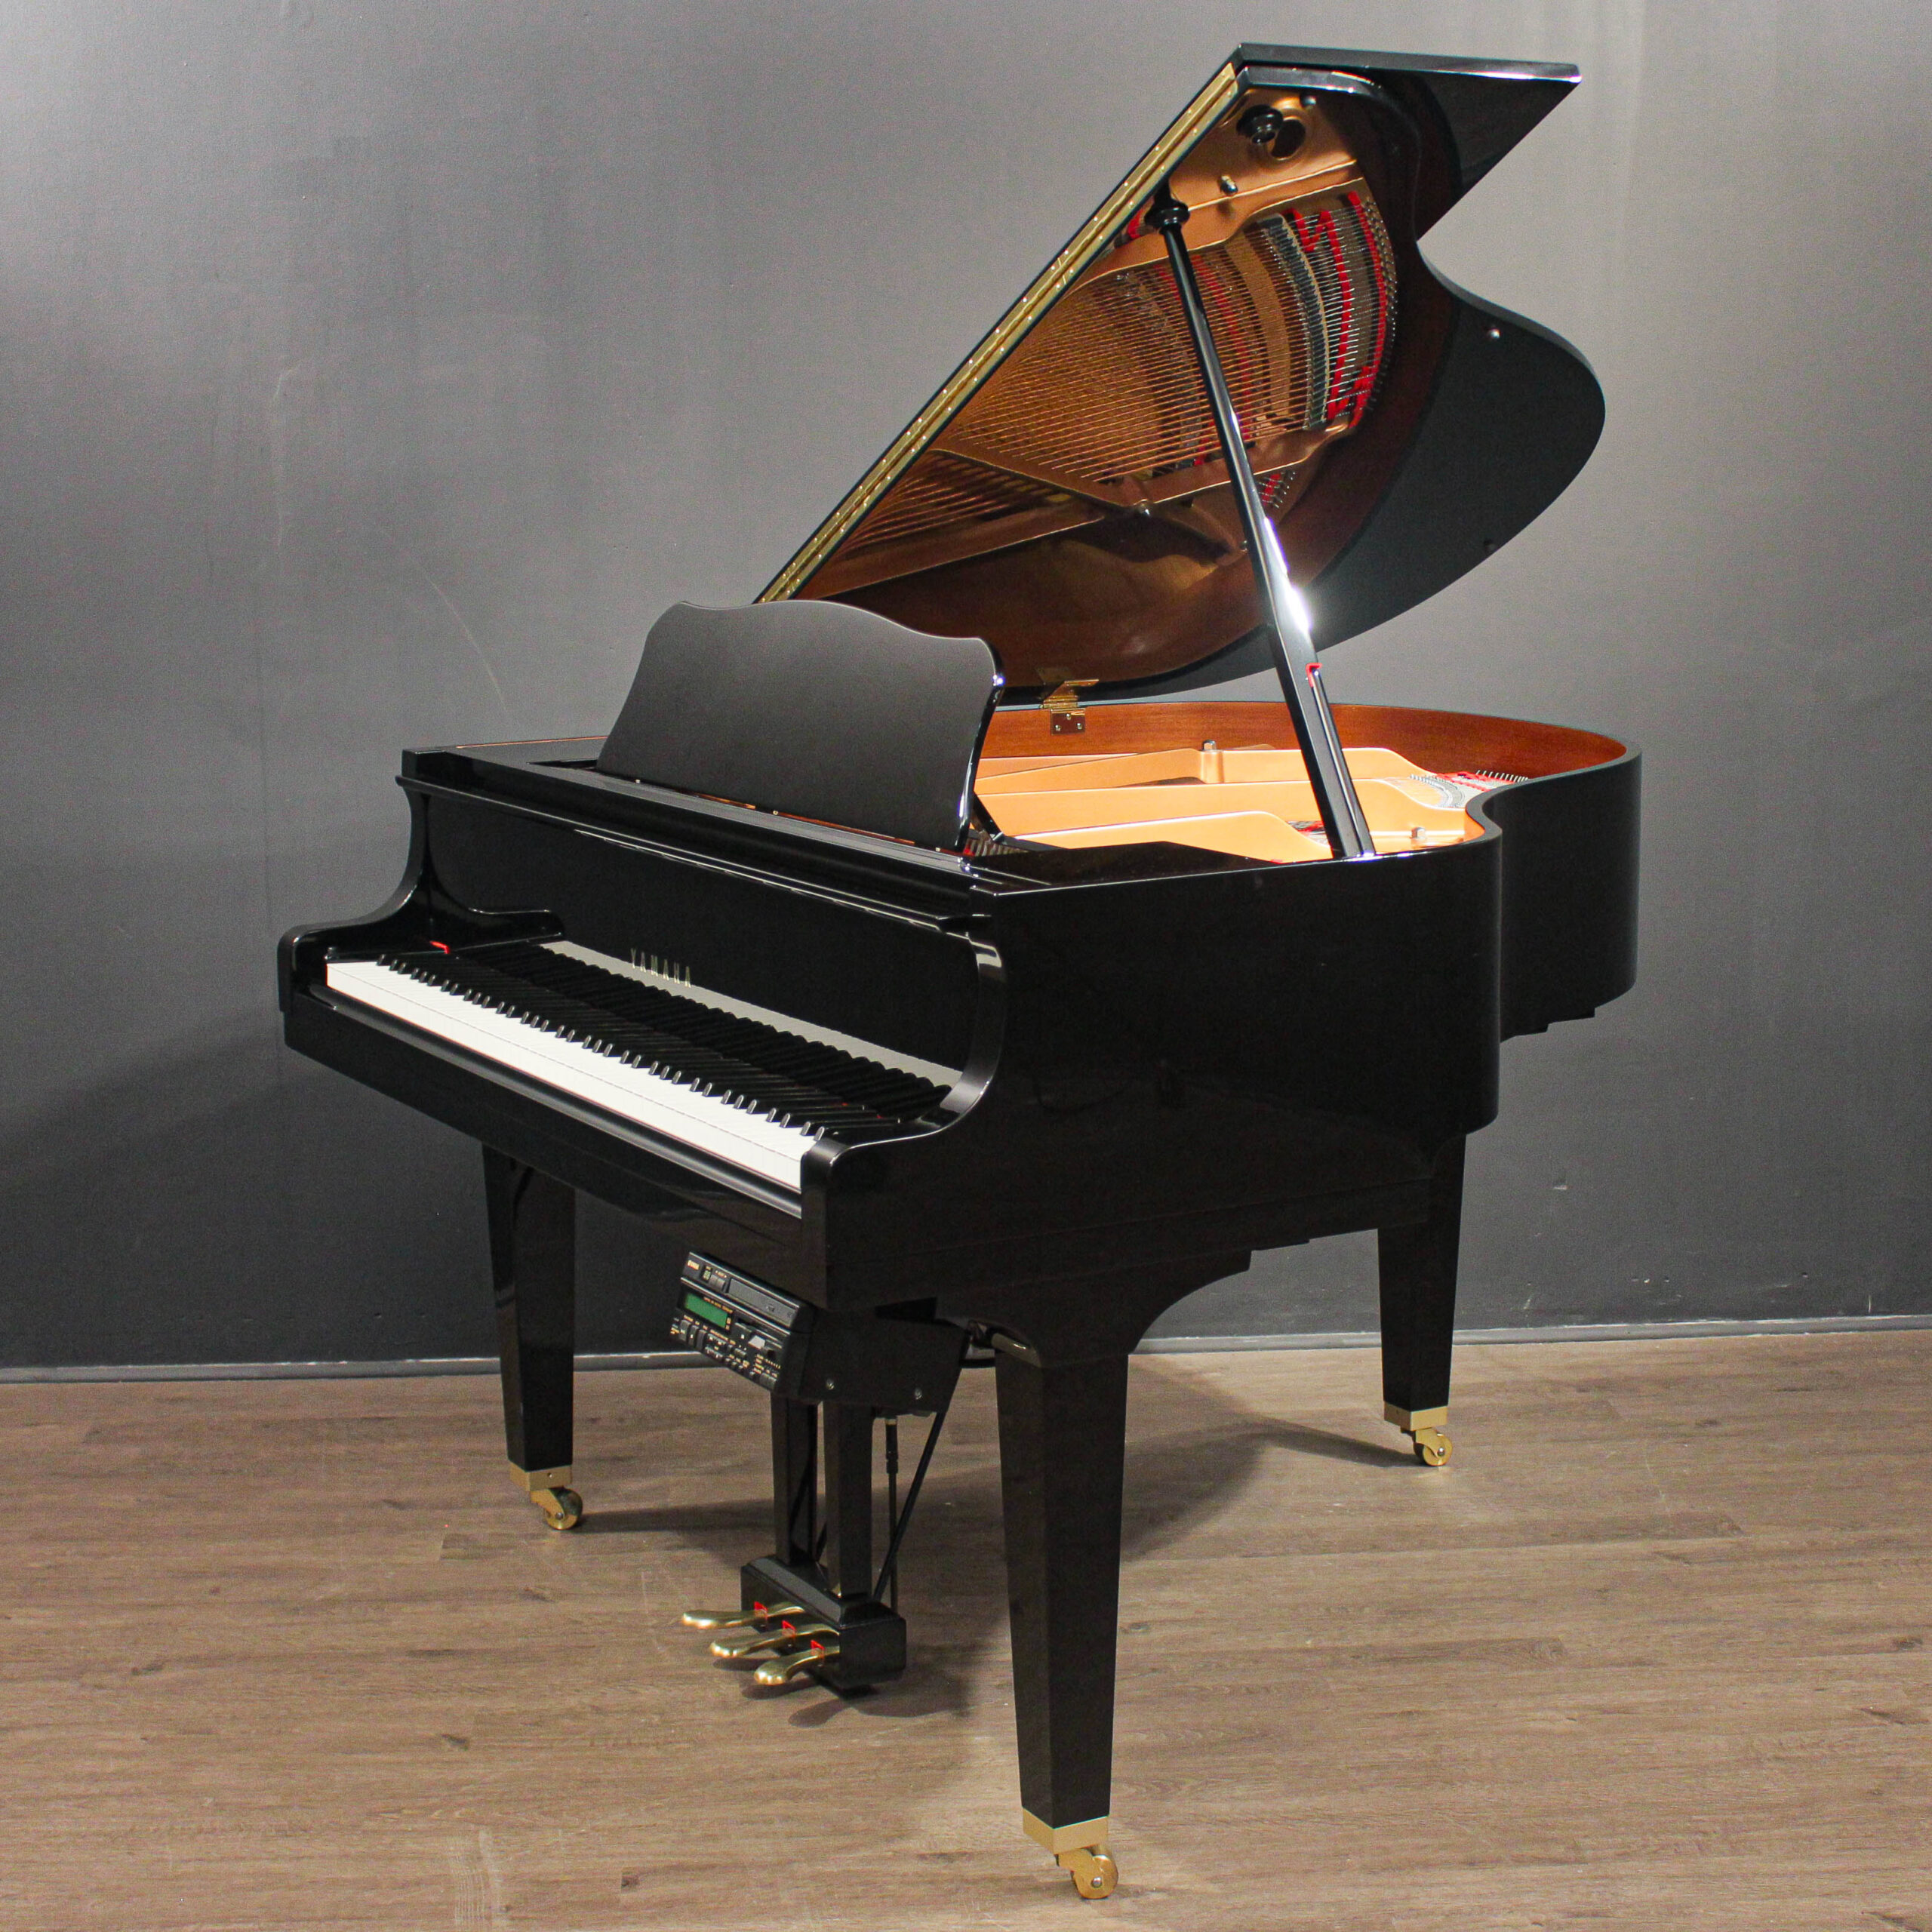 
Discover The Beauty And Elegance of a Yamaha Rosewood Pianos